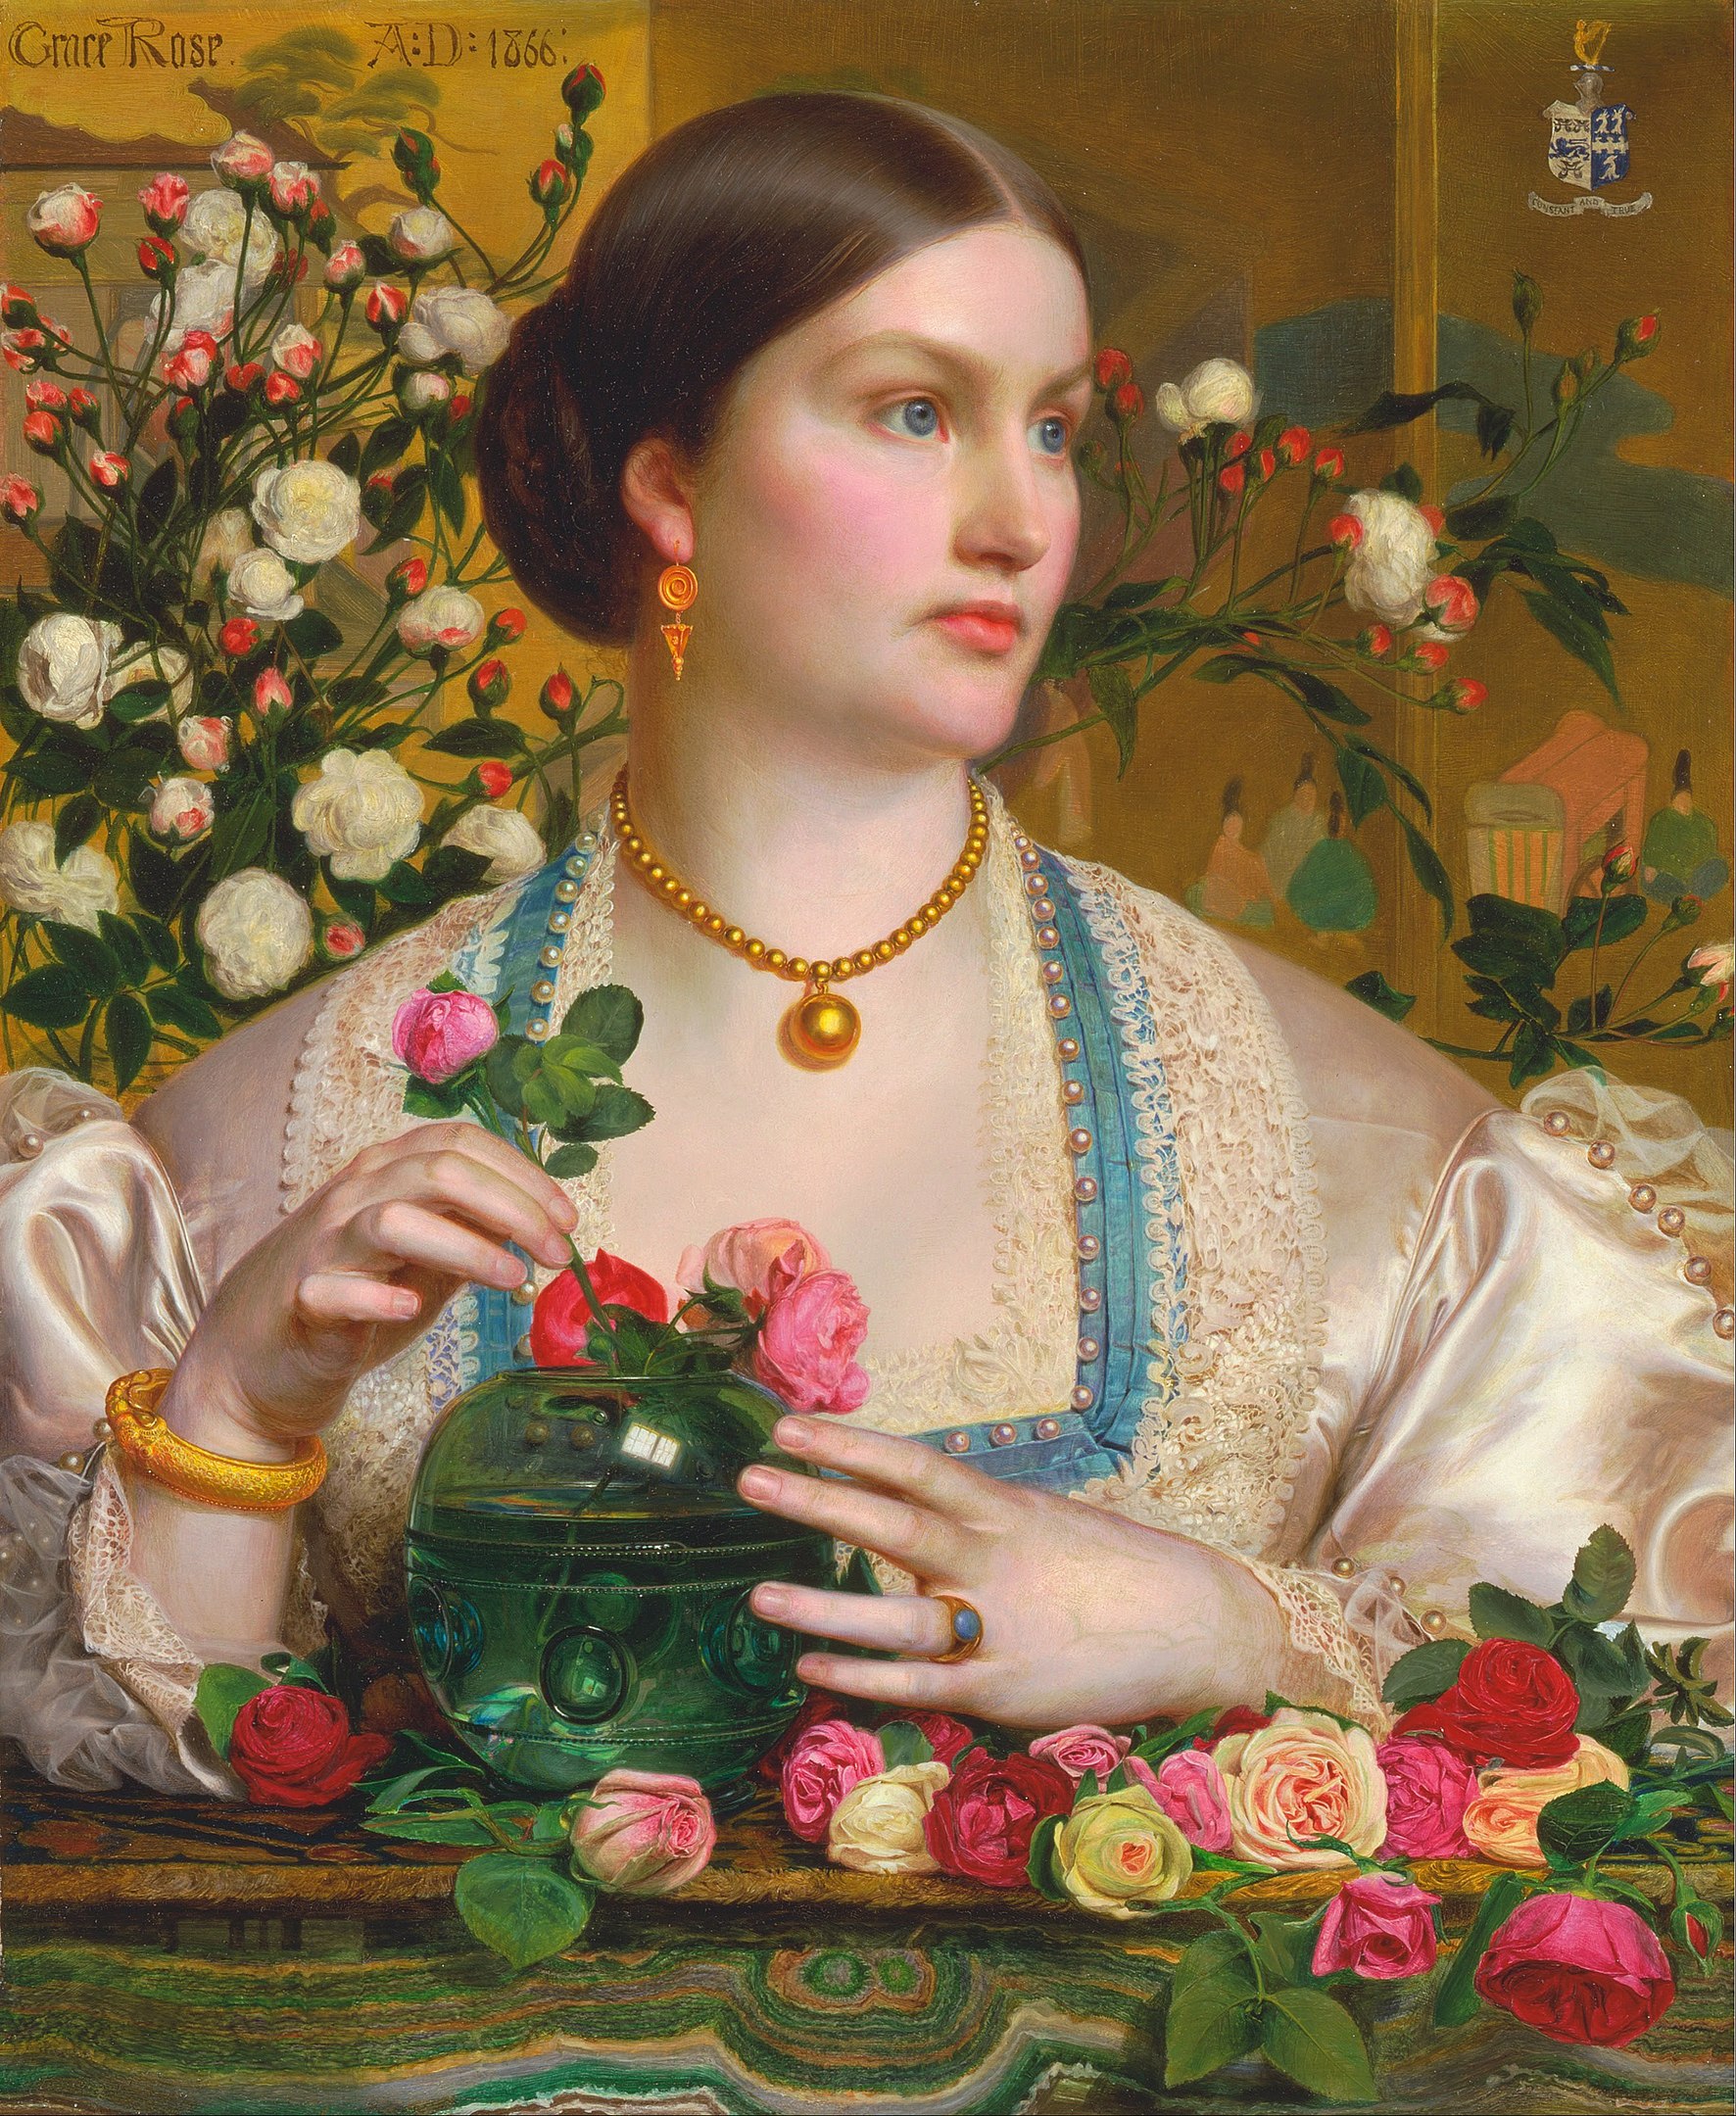 A portrait of a woman surrounded by roses